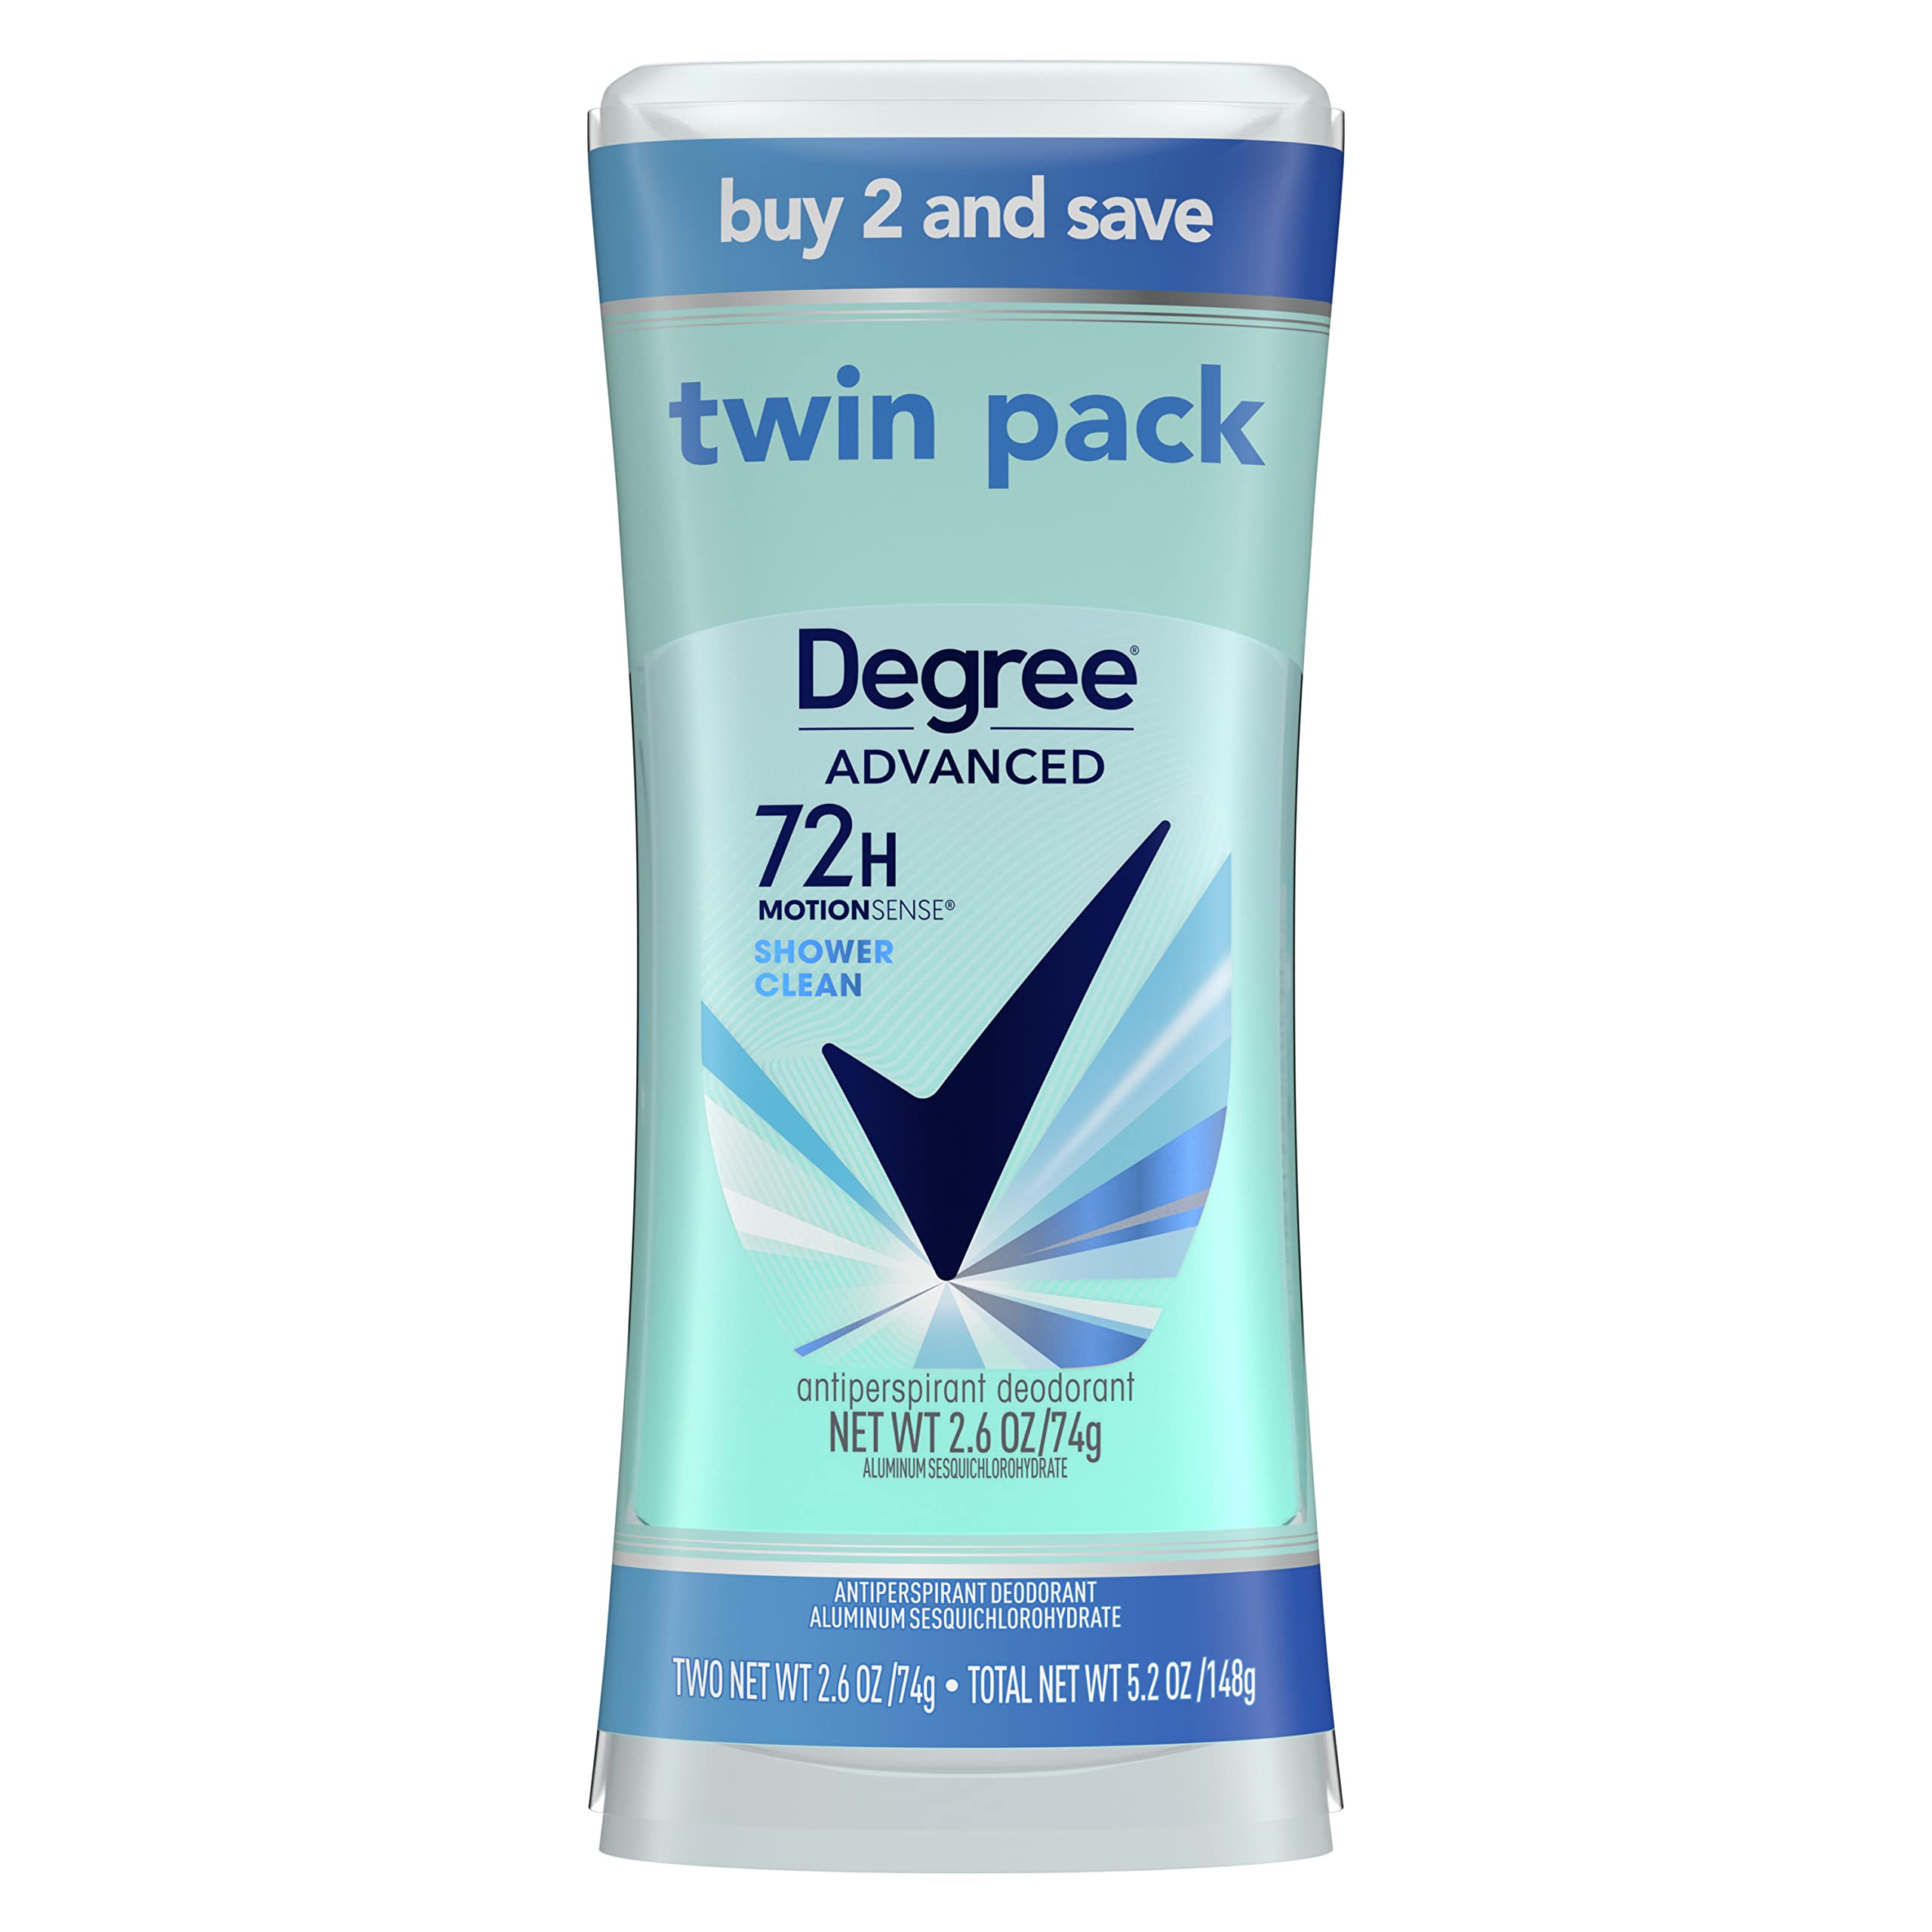 Degree Advanced Antiperspirant Deodorant 72-Hour Sweat & Odor Protection Shower Clean Antiperspirant for Women with MotionSense Technology 2.6 oz Twin Pack